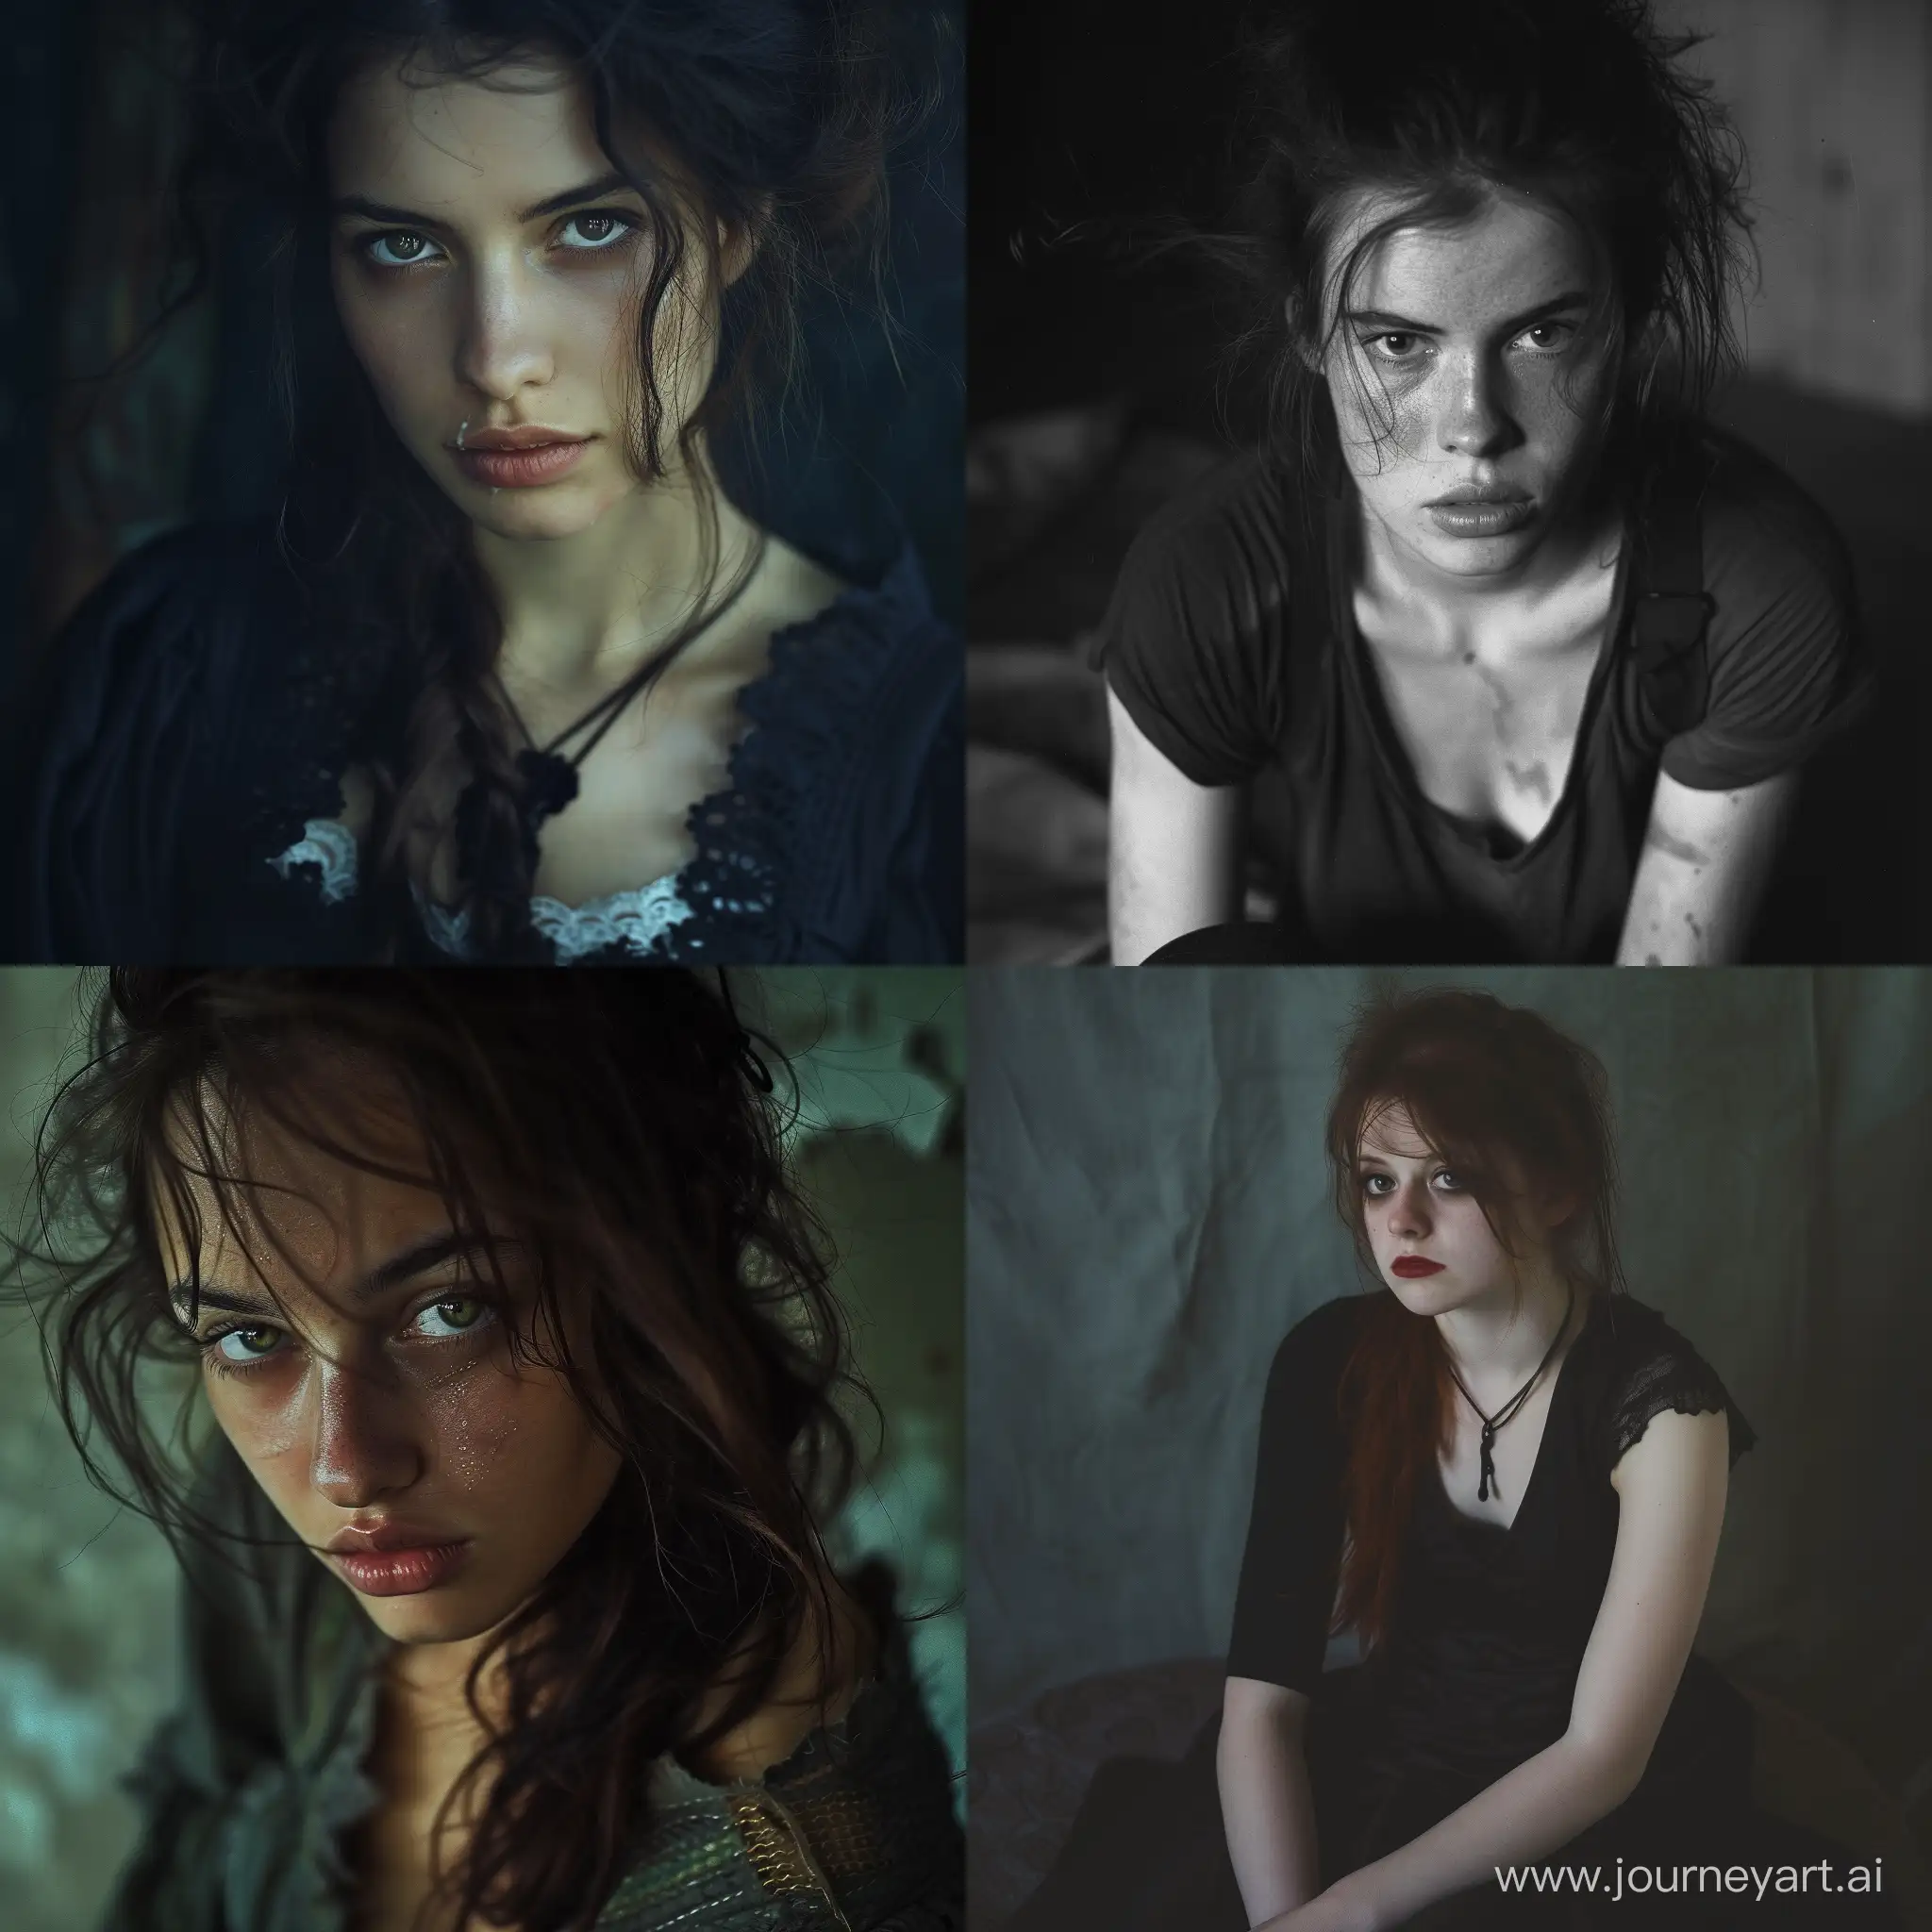 Enchanting-Dark-Fantasy-Photoshoot-with-Intense-Emotions-and-Cinematic-Flair